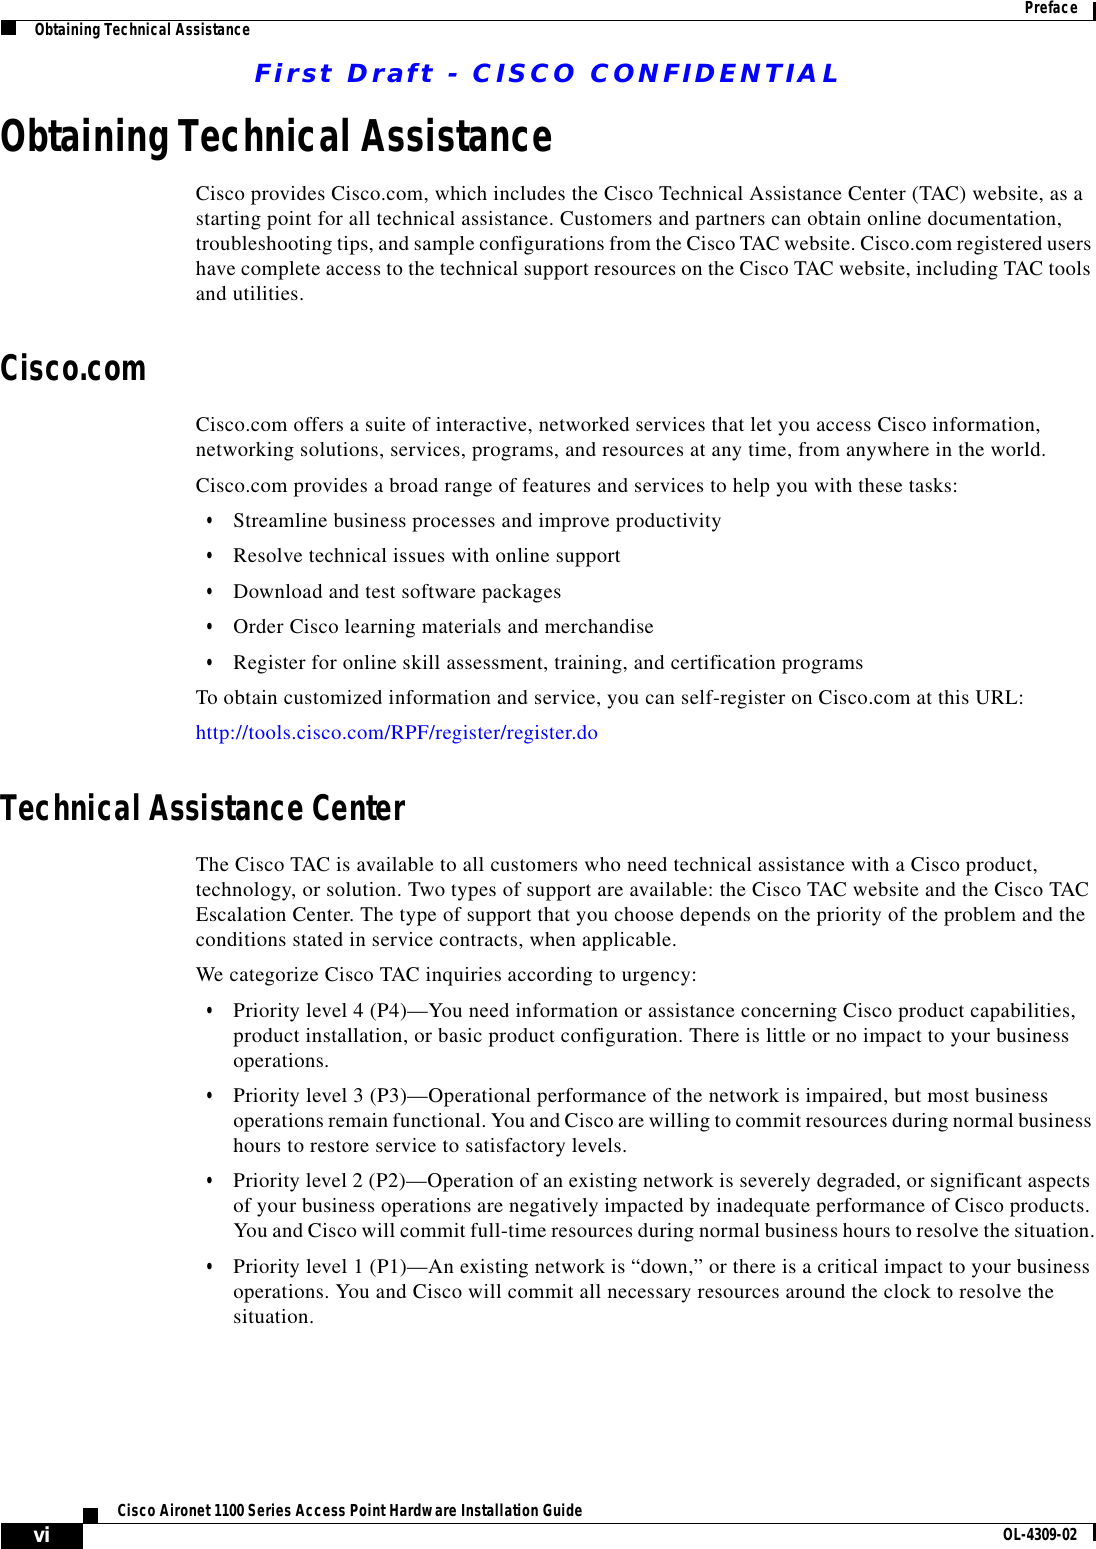 First Draft - CISCO CONFIDENTIALviCisco Aironet 1100 Series Access Point Hardware Installation Guide OL-4309-02PrefaceObtaining Technical AssistanceObtaining Technical AssistanceCisco provides Cisco.com, which includes the Cisco Technical Assistance Center (TAC) website, as a starting point for all technical assistance. Customers and partners can obtain online documentation, troubleshooting tips, and sample configurations from the Cisco TAC website. Cisco.com registered users have complete access to the technical support resources on the Cisco TAC website, including TAC tools and utilities. Cisco.comCisco.com offers a suite of interactive, networked services that let you access Cisco information, networking solutions, services, programs, and resources at any time, from anywhere in the world. Cisco.com provides a broad range of features and services to help you with these tasks:•Streamline business processes and improve productivity •Resolve technical issues with online support•Download and test software packages•Order Cisco learning materials and merchandise•Register for online skill assessment, training, and certification programsTo obtain customized information and service, you can self-register on Cisco.com at this URL:http://tools.cisco.com/RPF/register/register.doTechnical Assistance CenterThe Cisco TAC is available to all customers who need technical assistance with a Cisco product, technology, or solution. Two types of support are available: the Cisco TAC website and the Cisco TAC Escalation Center. The type of support that you choose depends on the priority of the problem and the conditions stated in service contracts, when applicable.We categorize Cisco TAC inquiries according to urgency:•Priority level 4 (P4)—You need information or assistance concerning Cisco product capabilities, product installation, or basic product configuration. There is little or no impact to your business operations.•Priority level 3 (P3)—Operational performance of the network is impaired, but most business operations remain functional. You and Cisco are willing to commit resources during normal business hours to restore service to satisfactory levels.•Priority level 2 (P2)—Operation of an existing network is severely degraded, or significant aspects of your business operations are negatively impacted by inadequate performance of Cisco products. You and Cisco will commit full-time resources during normal business hours to resolve the situation.•Priority level 1 (P1)—An existing network is “down,” or there is a critical impact to your business operations. You and Cisco will commit all necessary resources around the clock to resolve the situation.